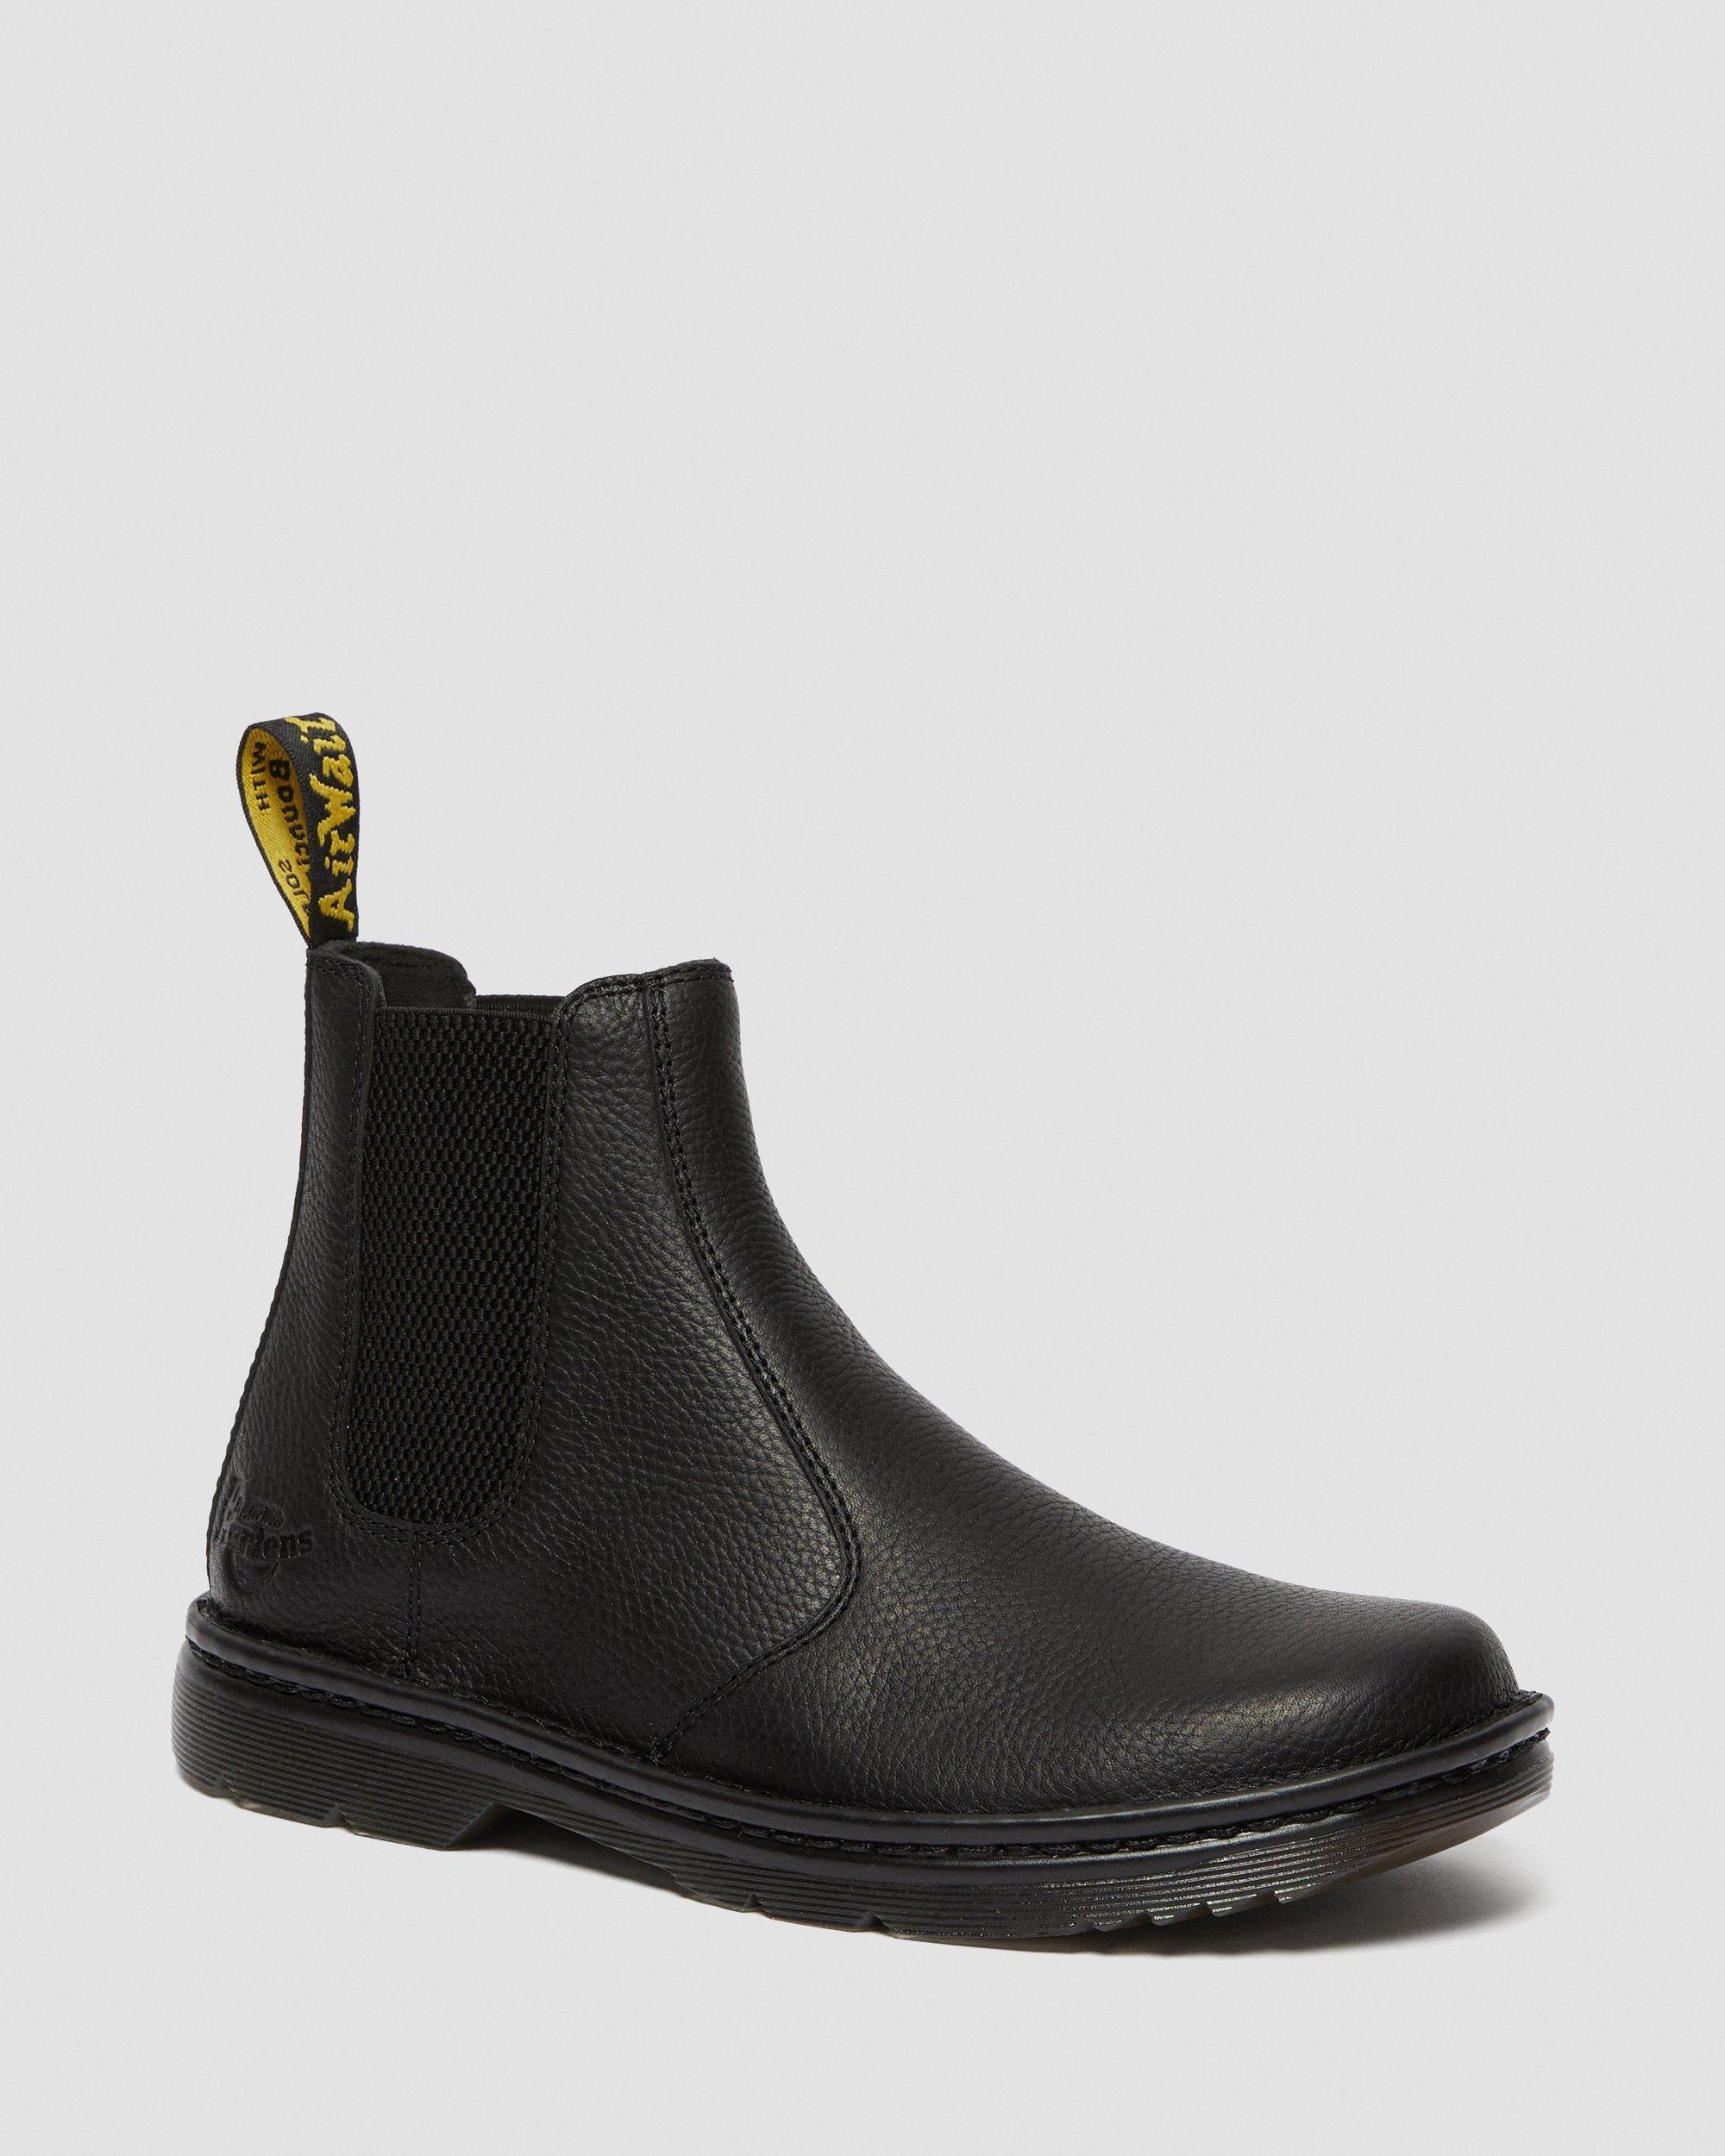 SUFFOLK LEATHER NON SLIP CHELSEA BOOTS 